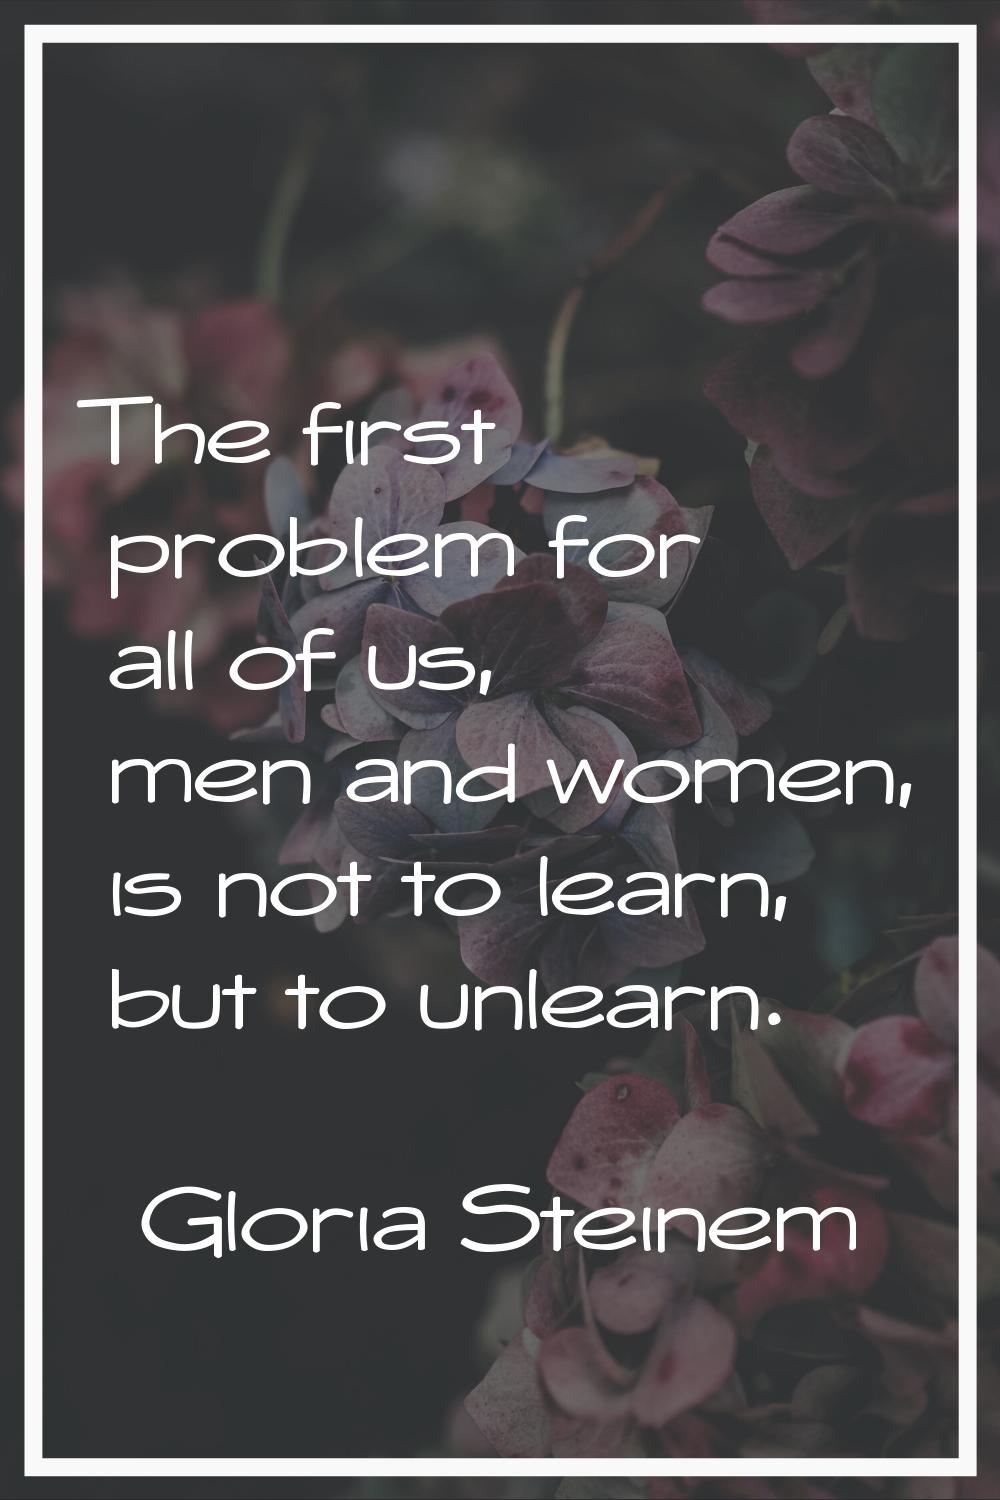 The first problem for all of us, men and women, is not to learn, but to unlearn.